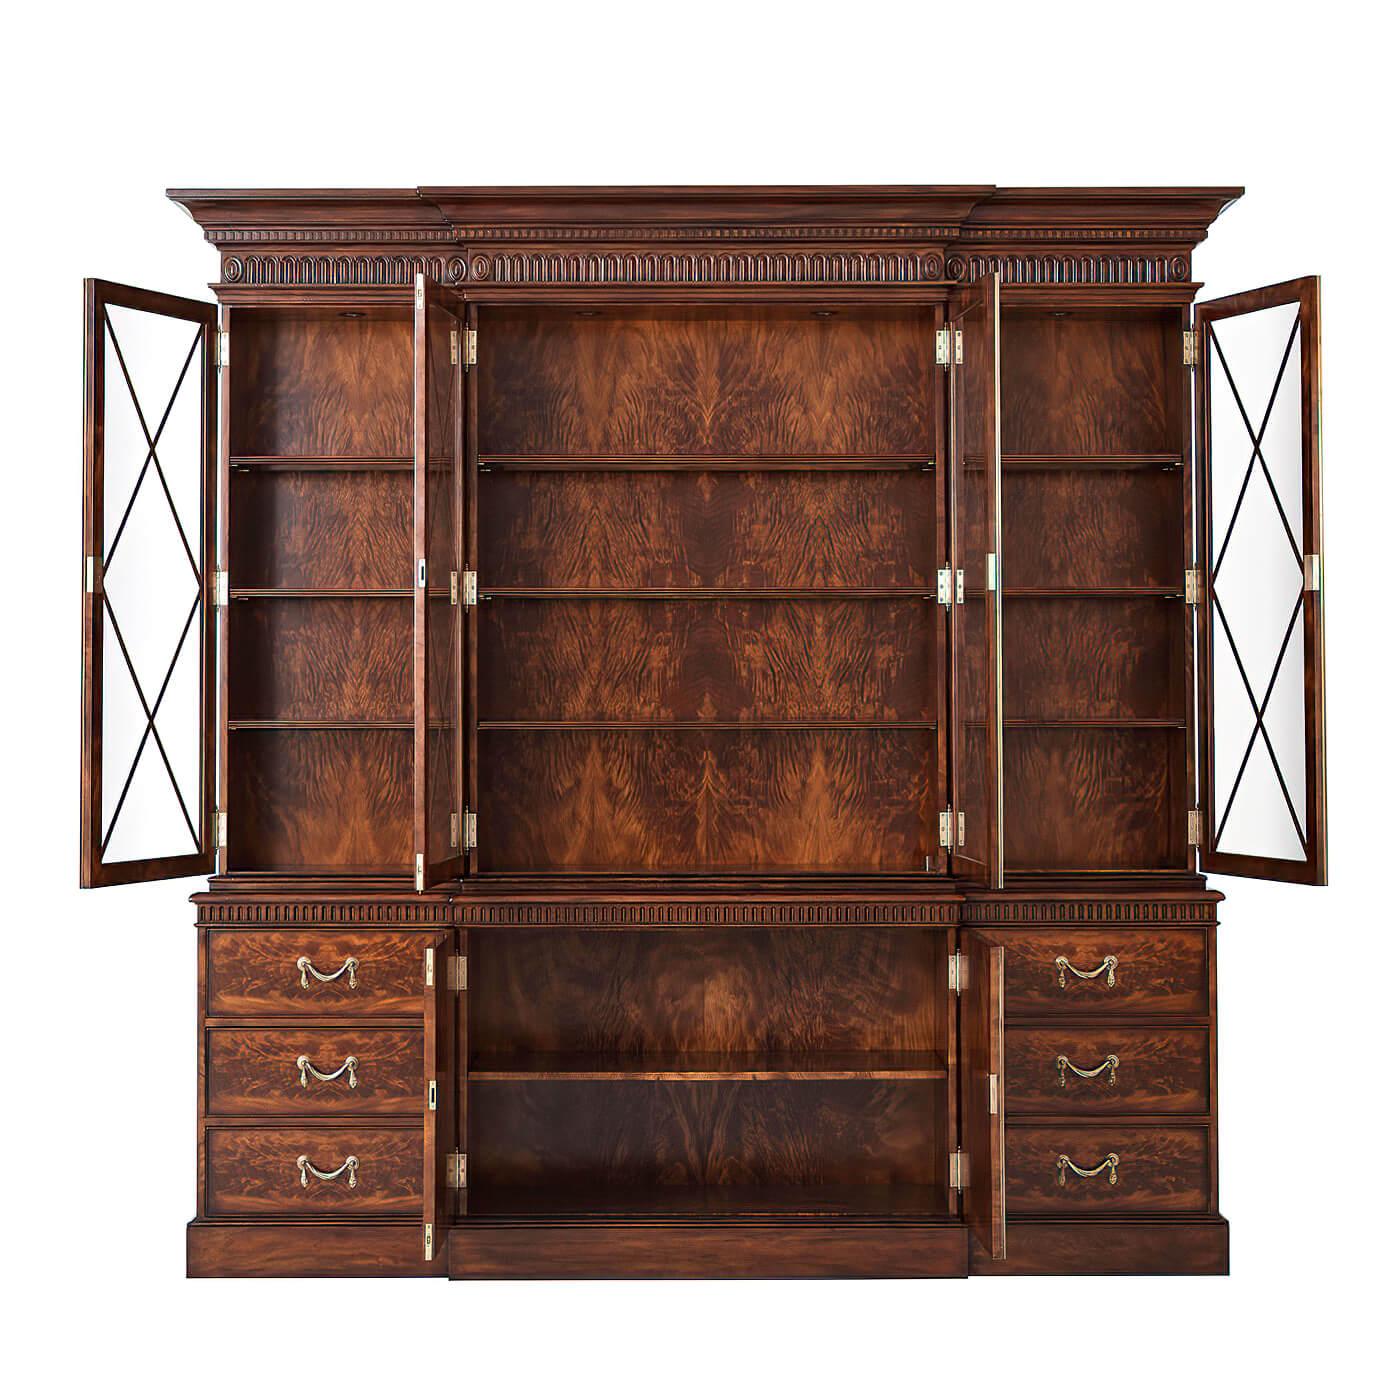 A George III style mahogany breakfront bookcase, the upper sections with a molded cornice above a fluted frieze ornamented with dentils and oval rosettes, the bold diamond lattice astragal glazed doors enclosing reeded edge shelves above two